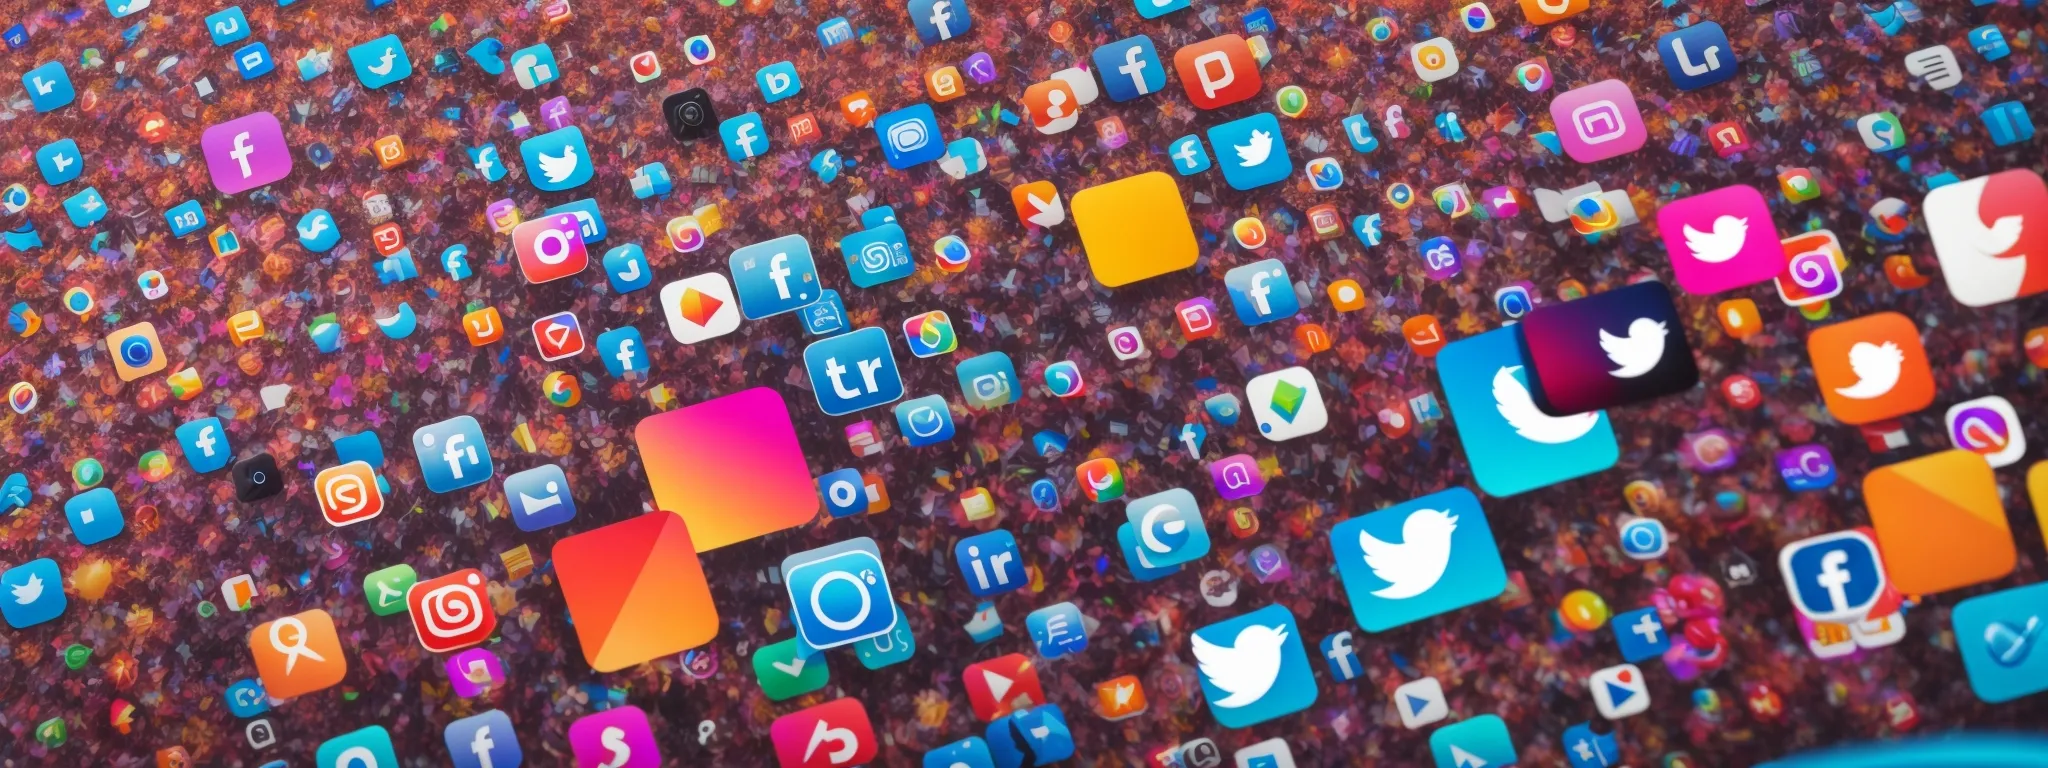 A Smartphone With Various Social Media App Icons Floating Around It On A Vibrant Background.